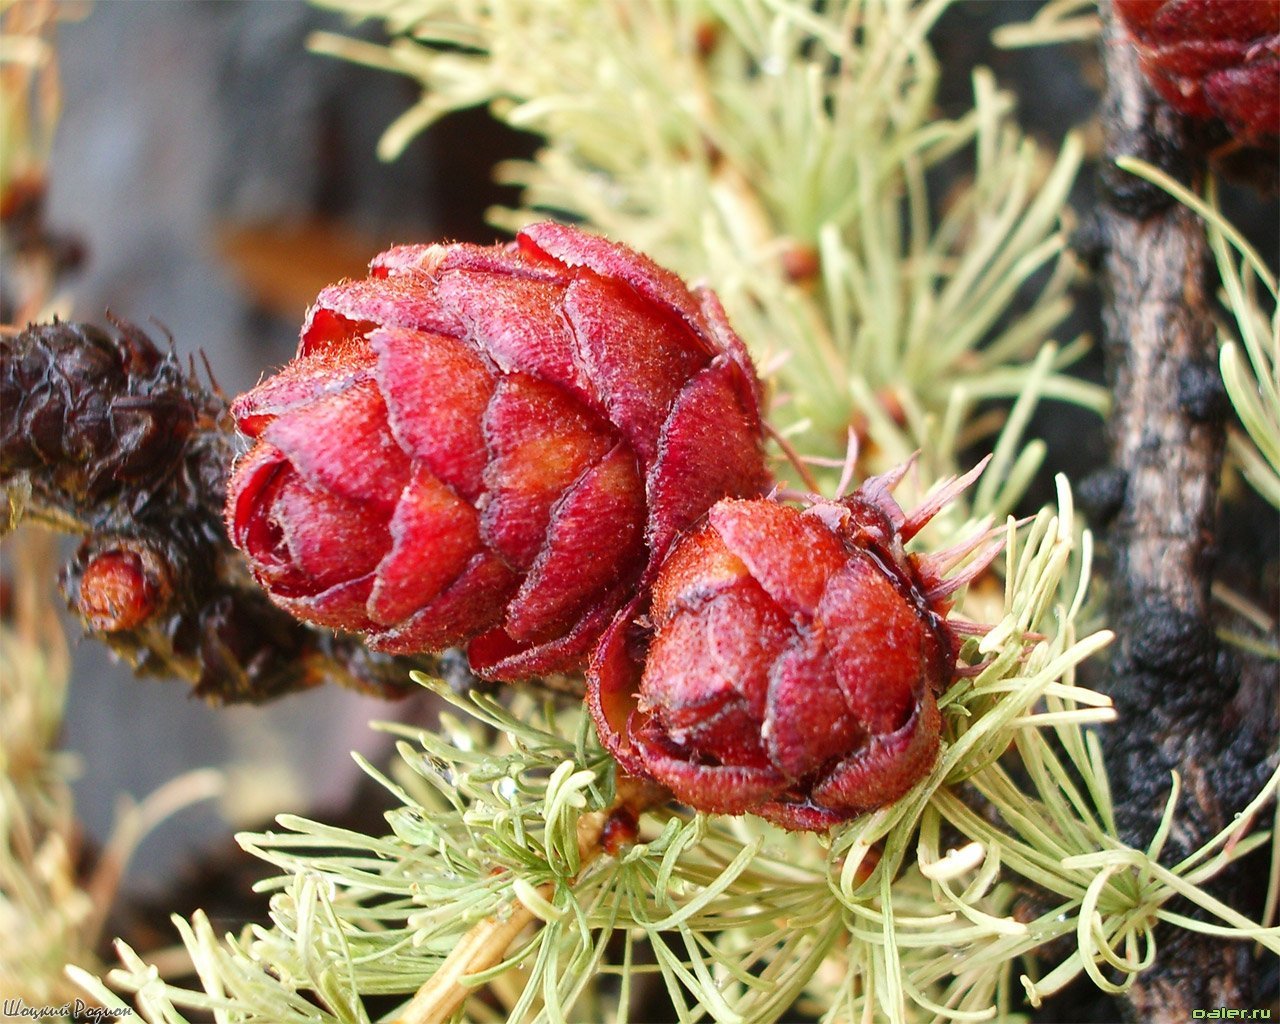 plants, cones, fir trees wallpapers for tablet